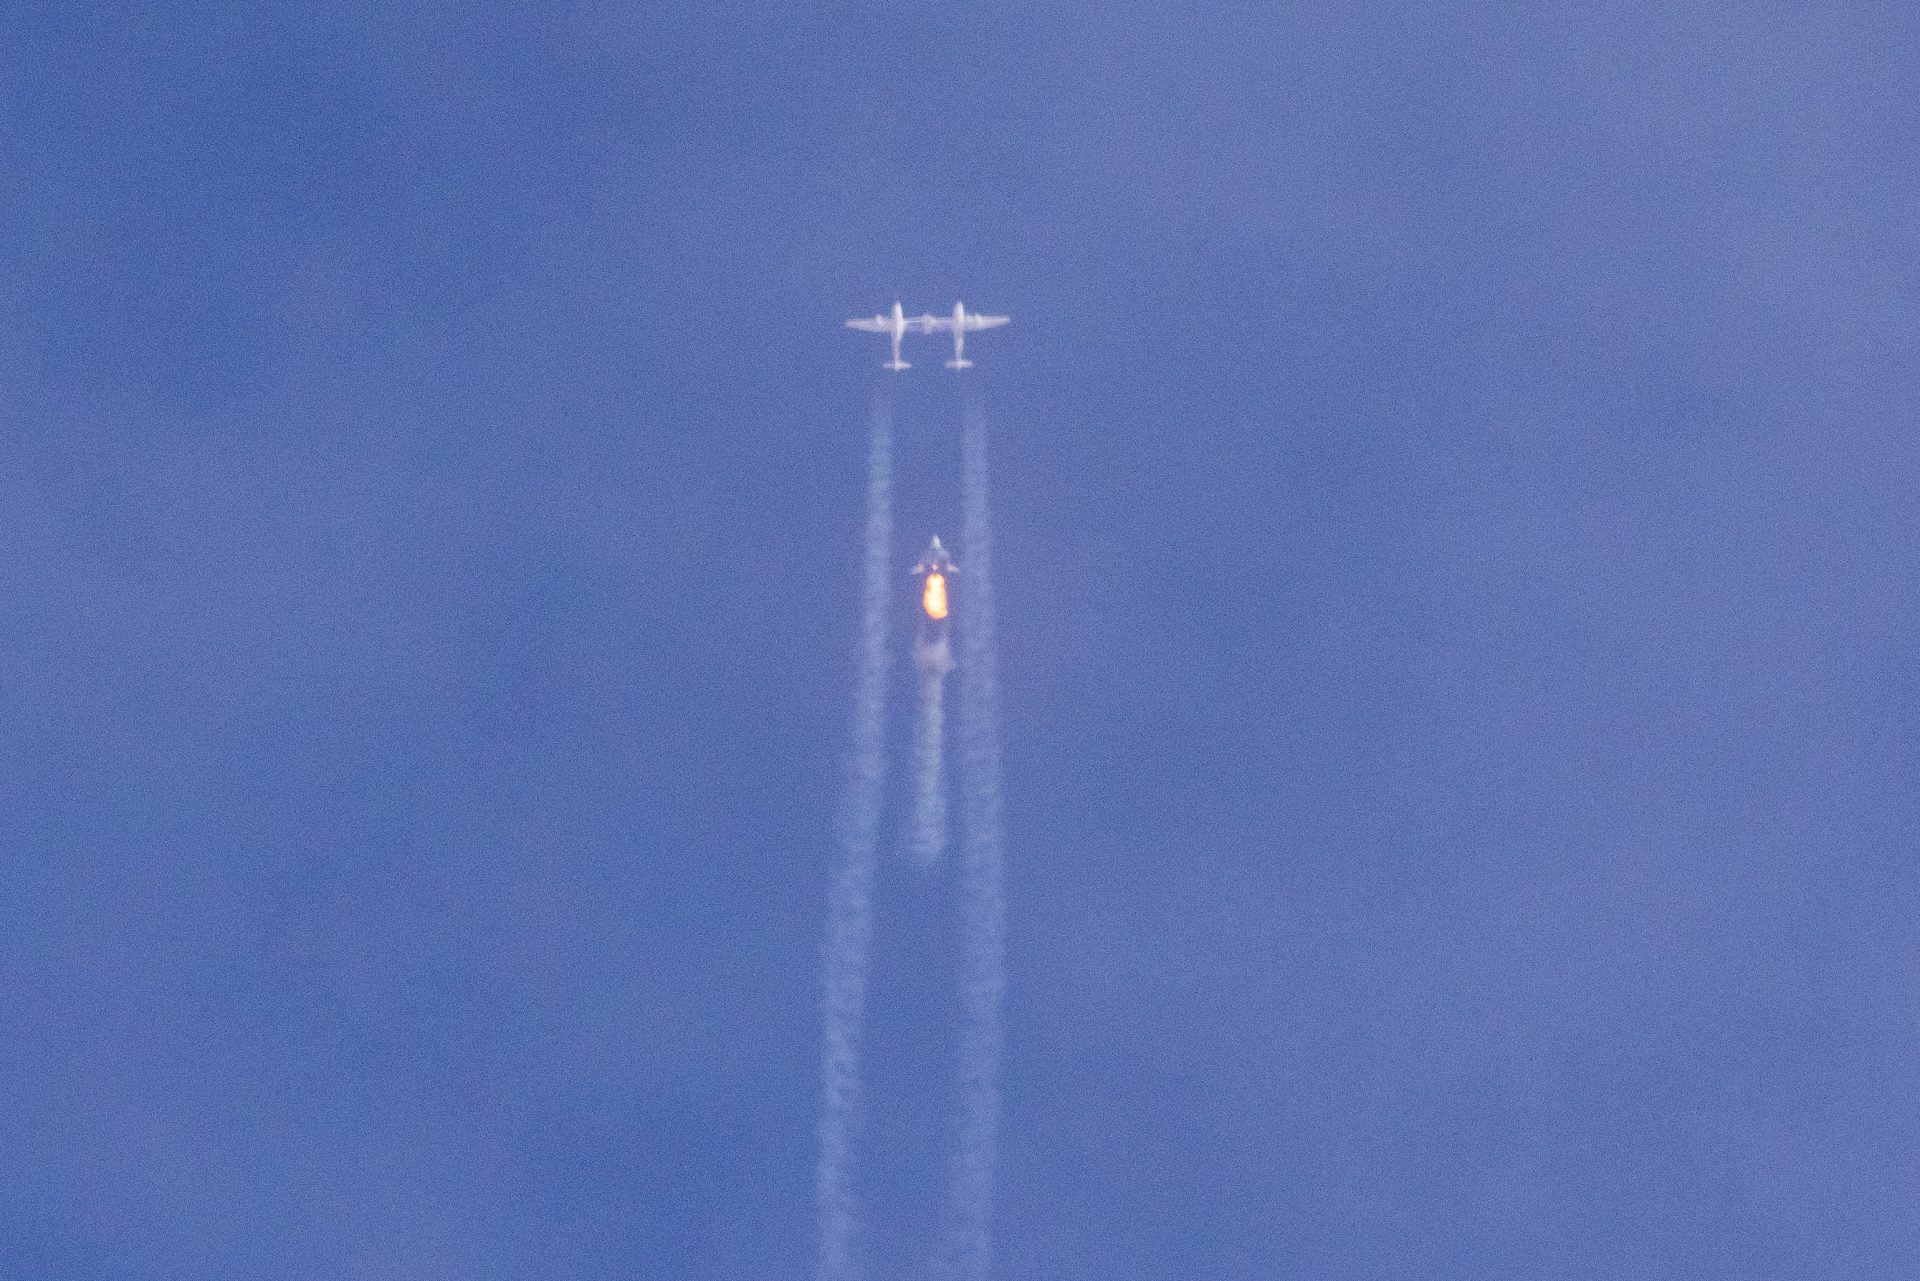 Was it an abort or launch failure? SpaceShipTwo abandons launch one second after ignition